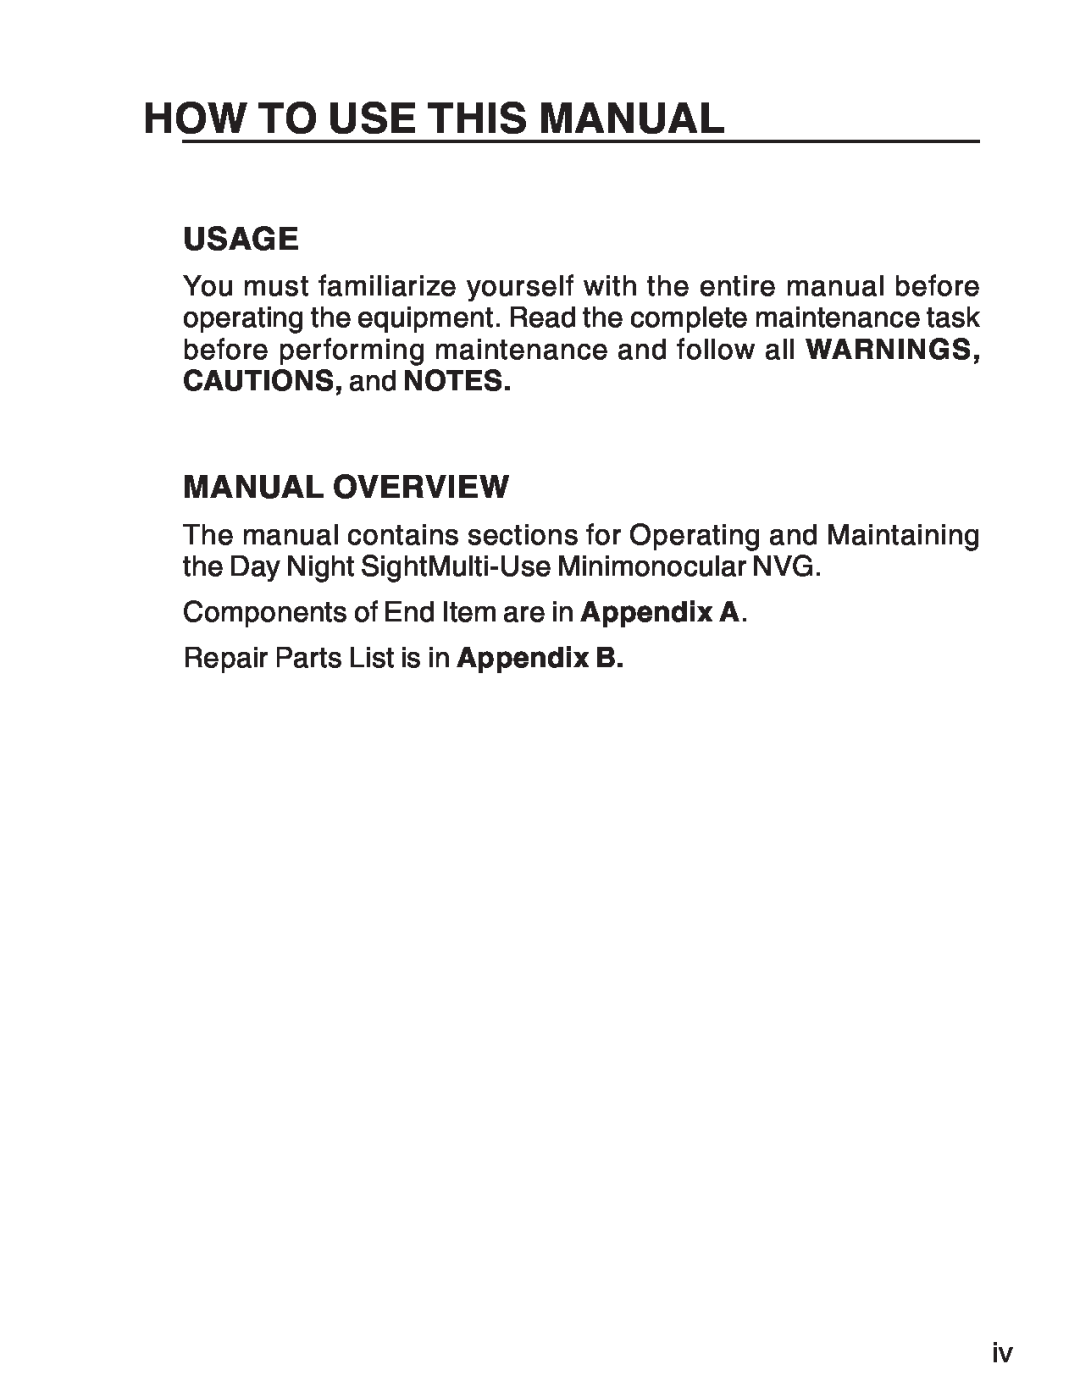 ATN 3 manual How To Use This Manual, Usage, Manual Overview 